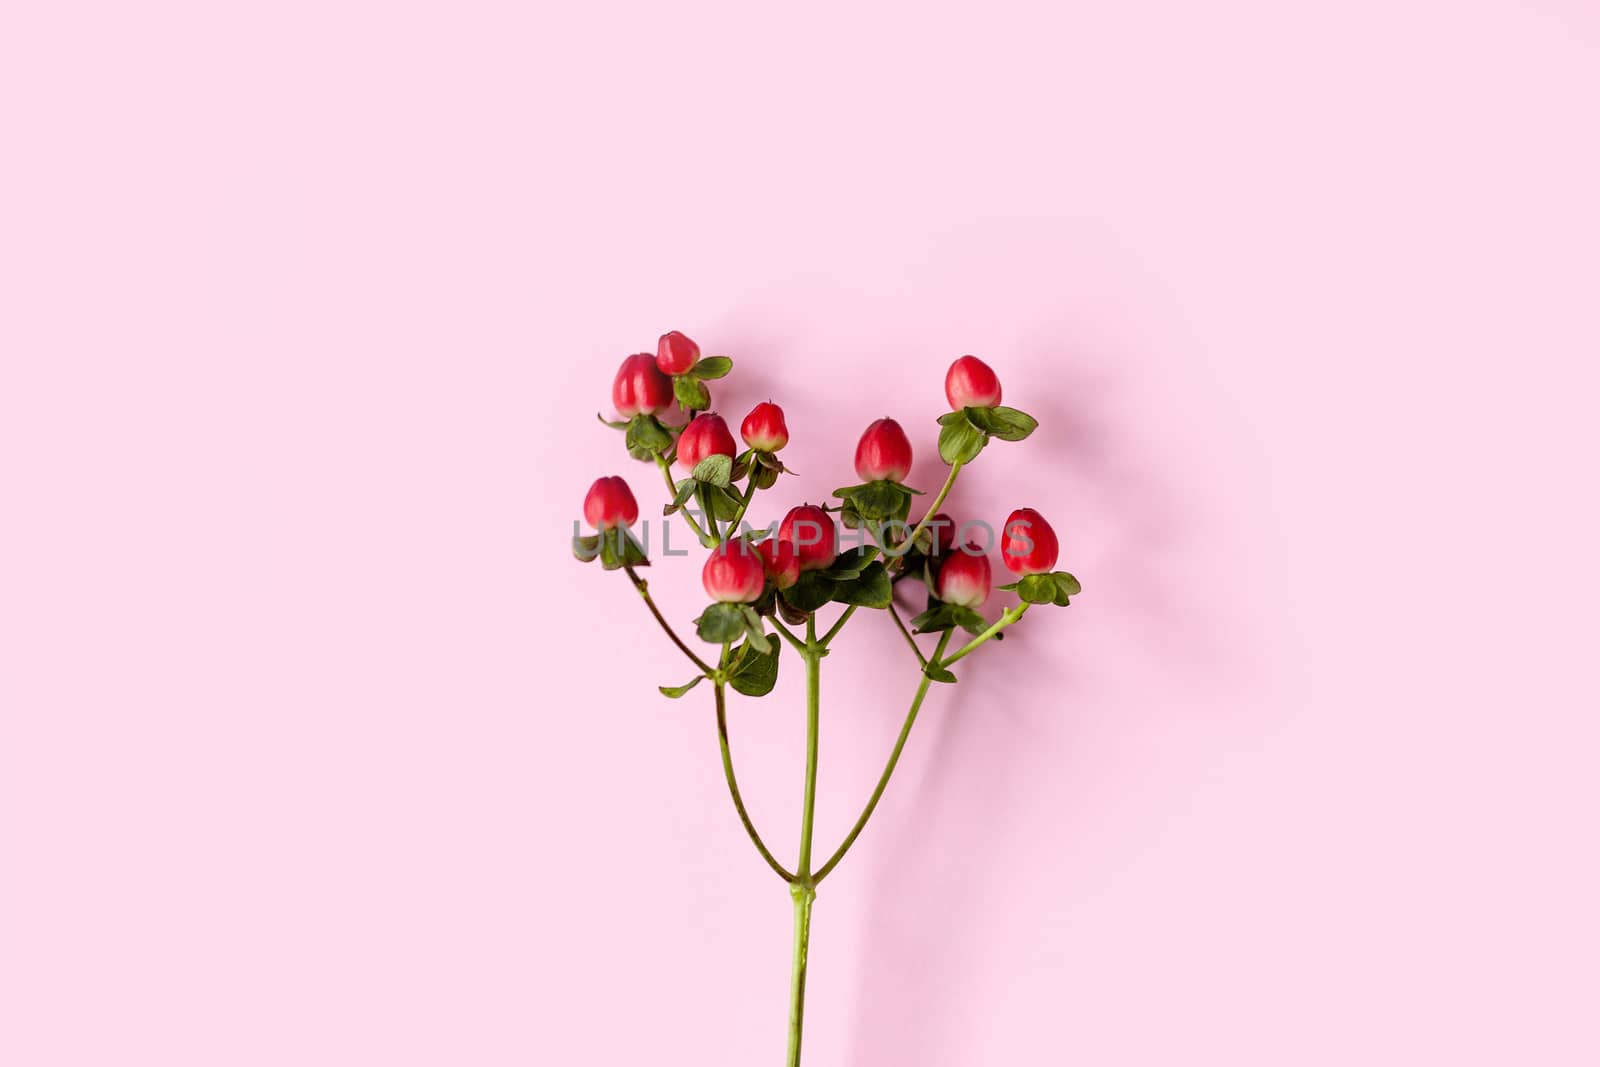 Hypericum perforatum, Red St. John's wort on a pink background, banner, postcard, advertising, homeopathy concept, alternative medicine, red fruit on a branch, background, design, copy space by Pirlik